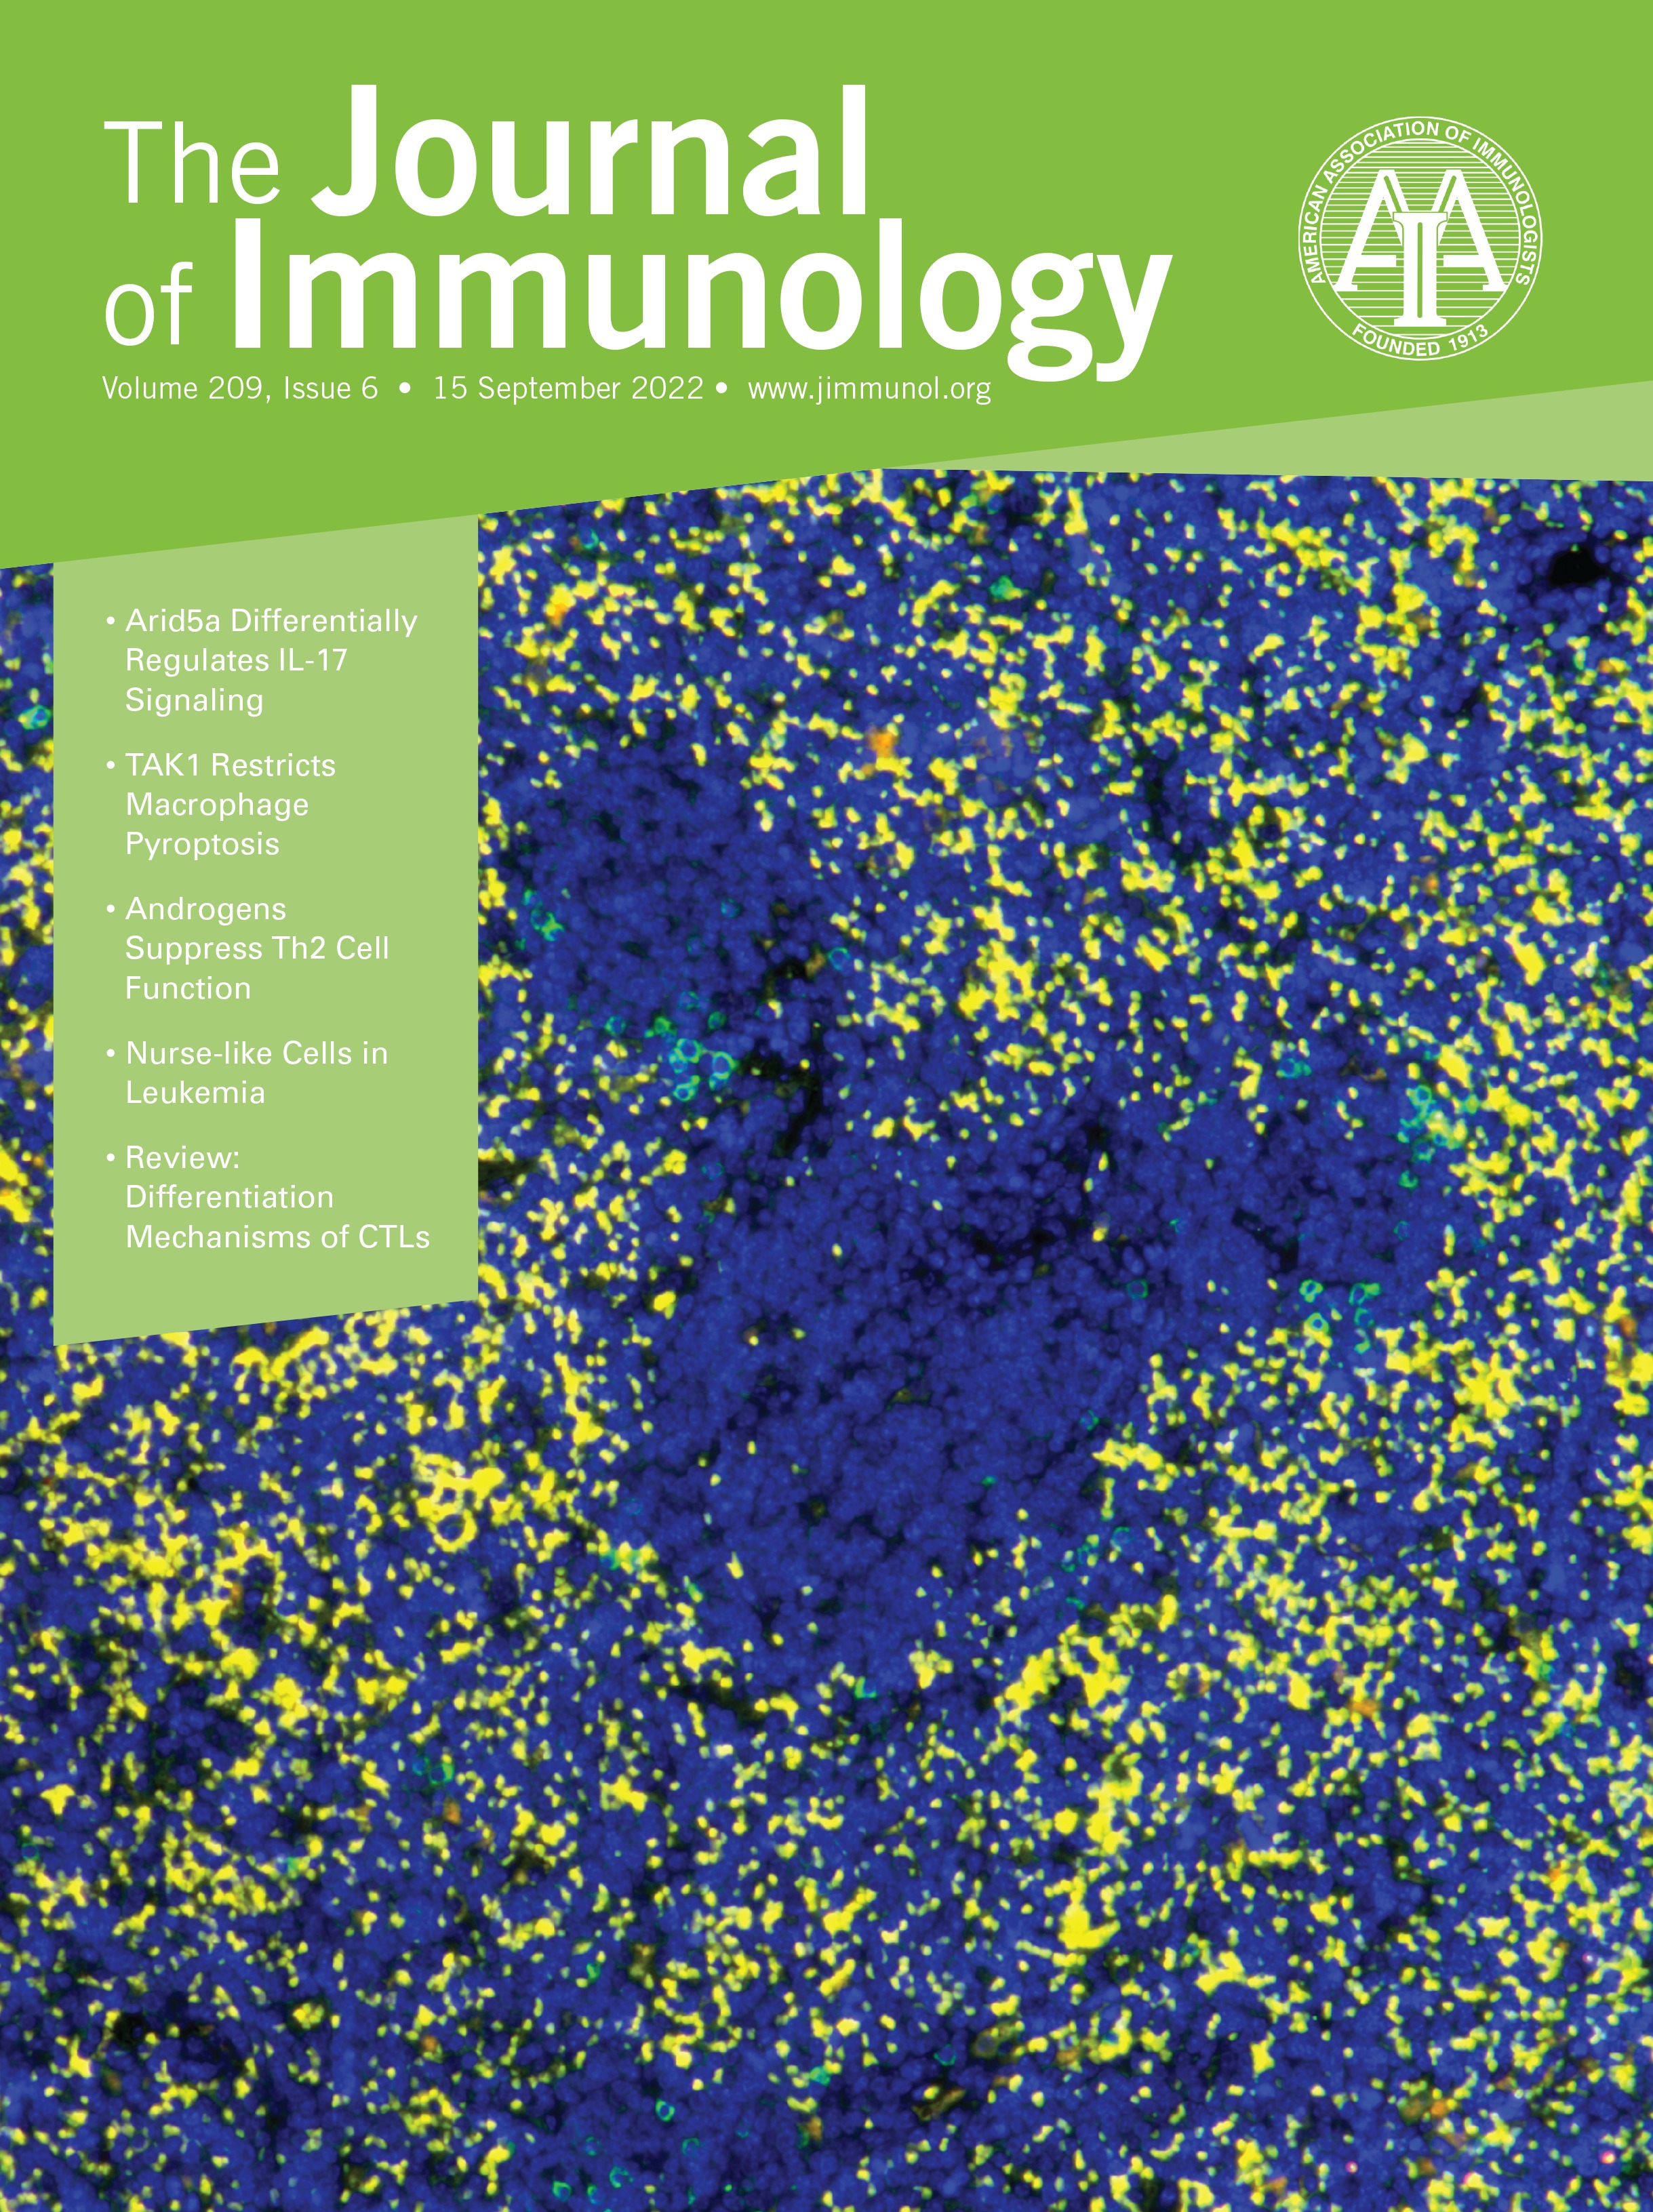 CD5 Suppresses IL-15-Induced Proliferation of Human Memory CD8+ T Cells by Inhibiting mTOR Pathways [IMMUNE REGULATION]